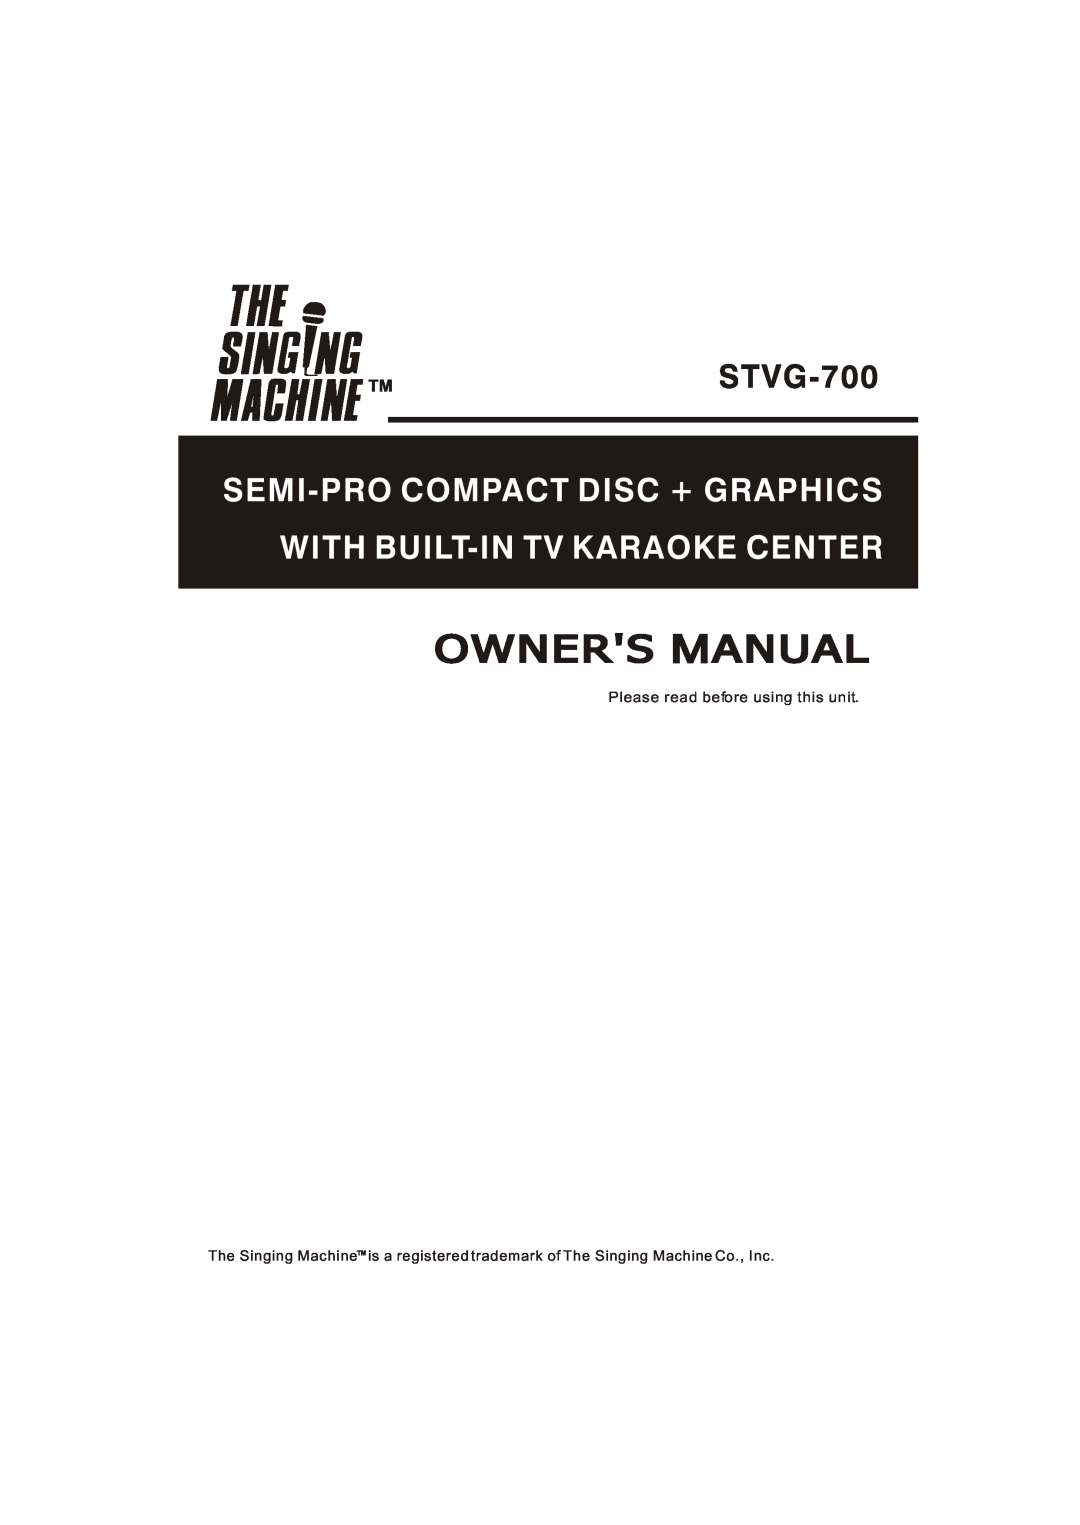 The Singing Machine STVG-700 manual Please read before using this unit 